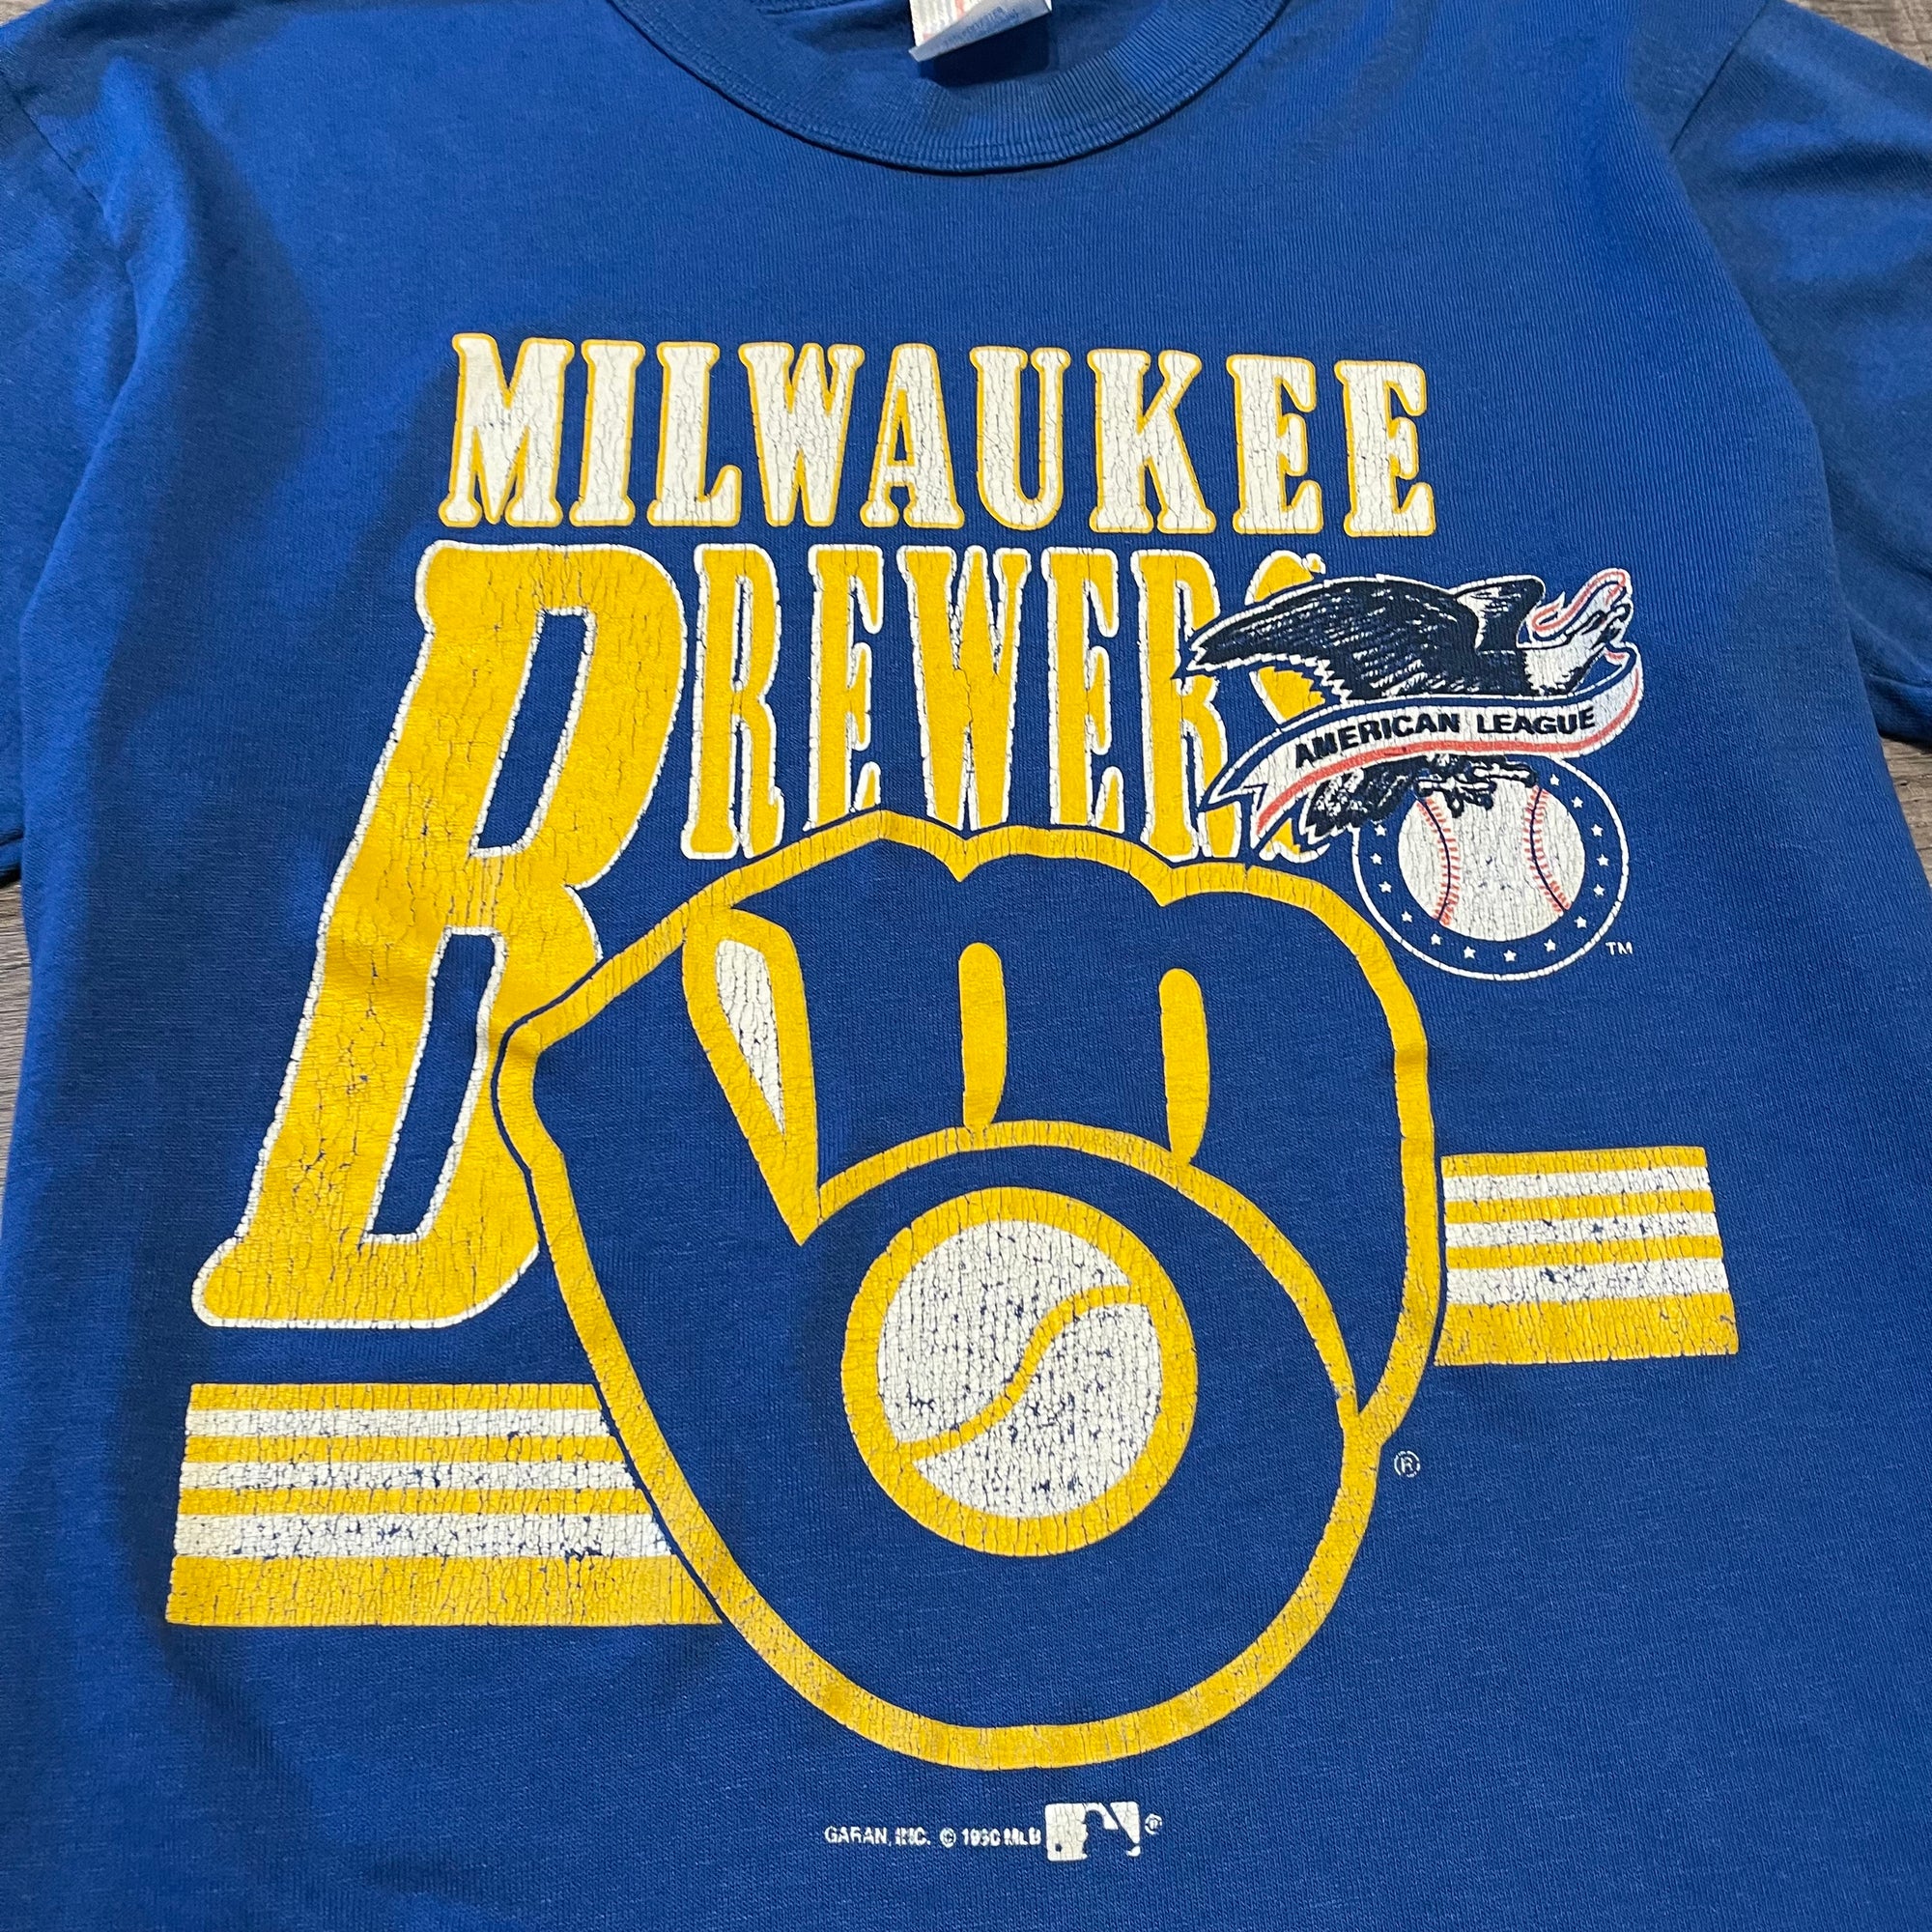 Vintage 90s Navy Majestic Milwaukee Brewers T-Shirt - X-Small